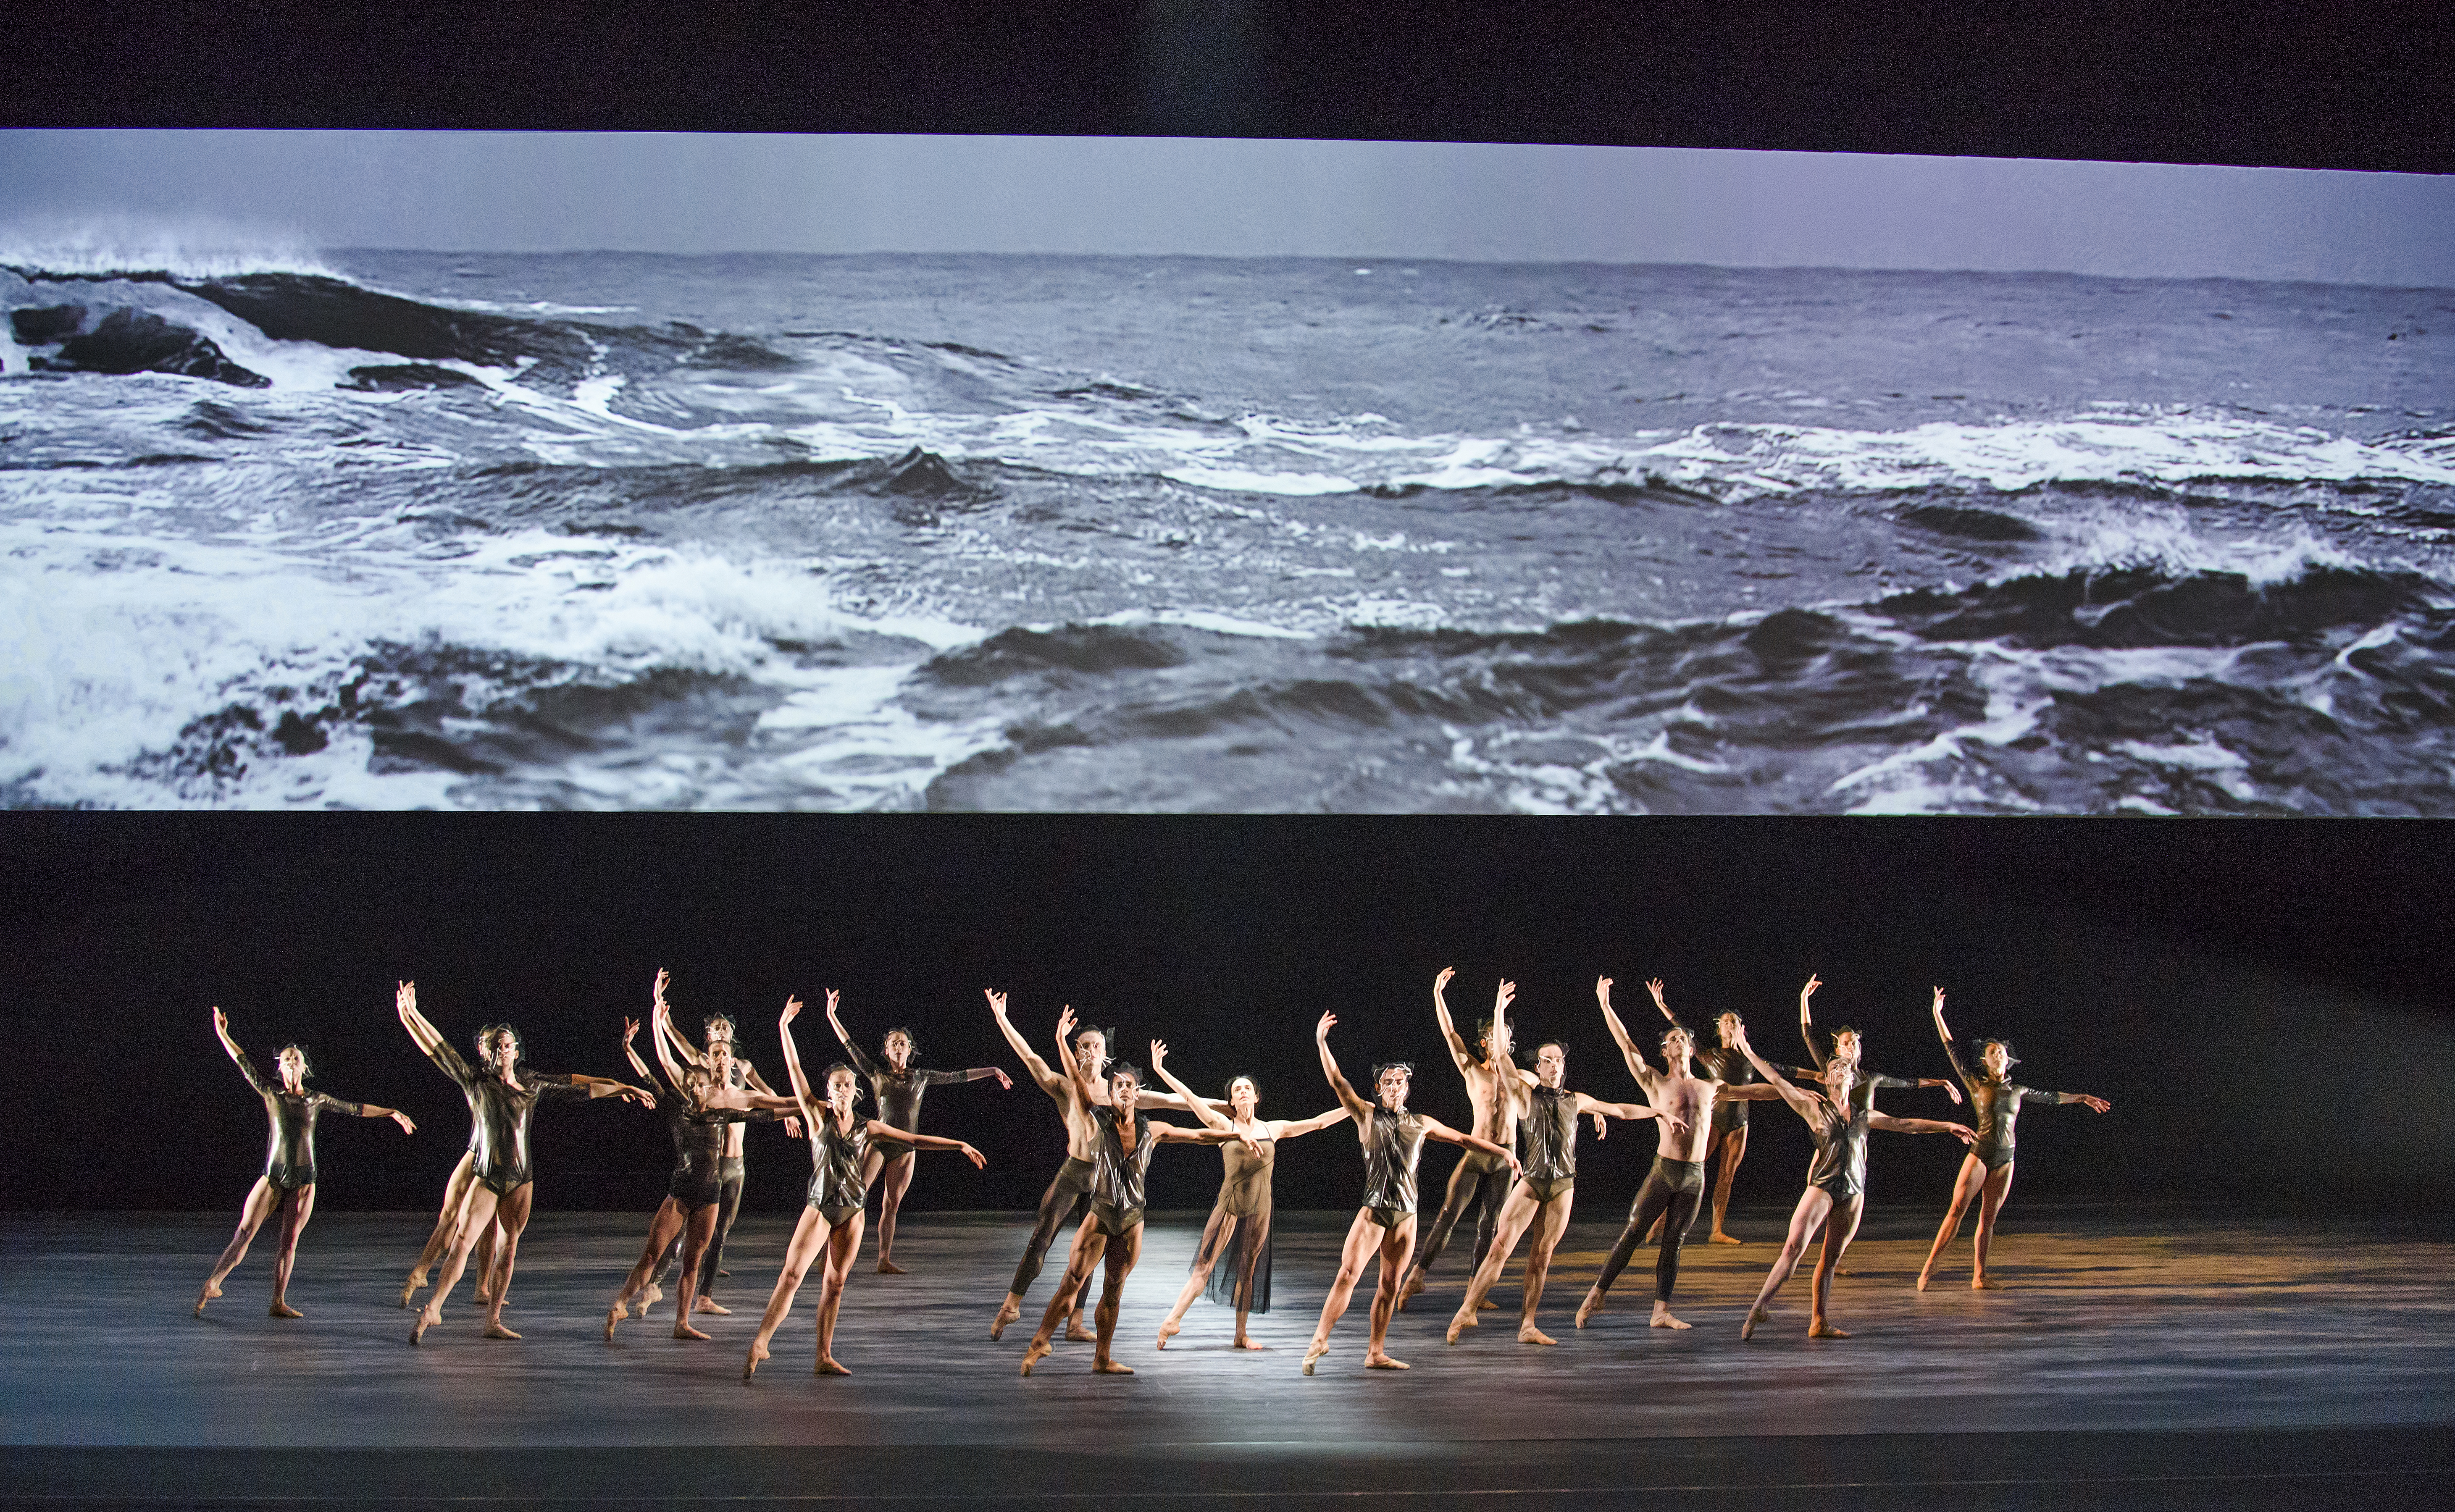 Wide images showing a scene from Part 2 of Woolf Works the World Premiere by Wayne McGregor and The Royal Ballet @ Royal Opera House. (Opening 11-05-15) ©Tristram Kenton 05/15 (3 Raveley Street, LONDON NW5 2HX TEL 0207 267 5550 Mob 07973 617 355)email: tristram@tristramkenton.com